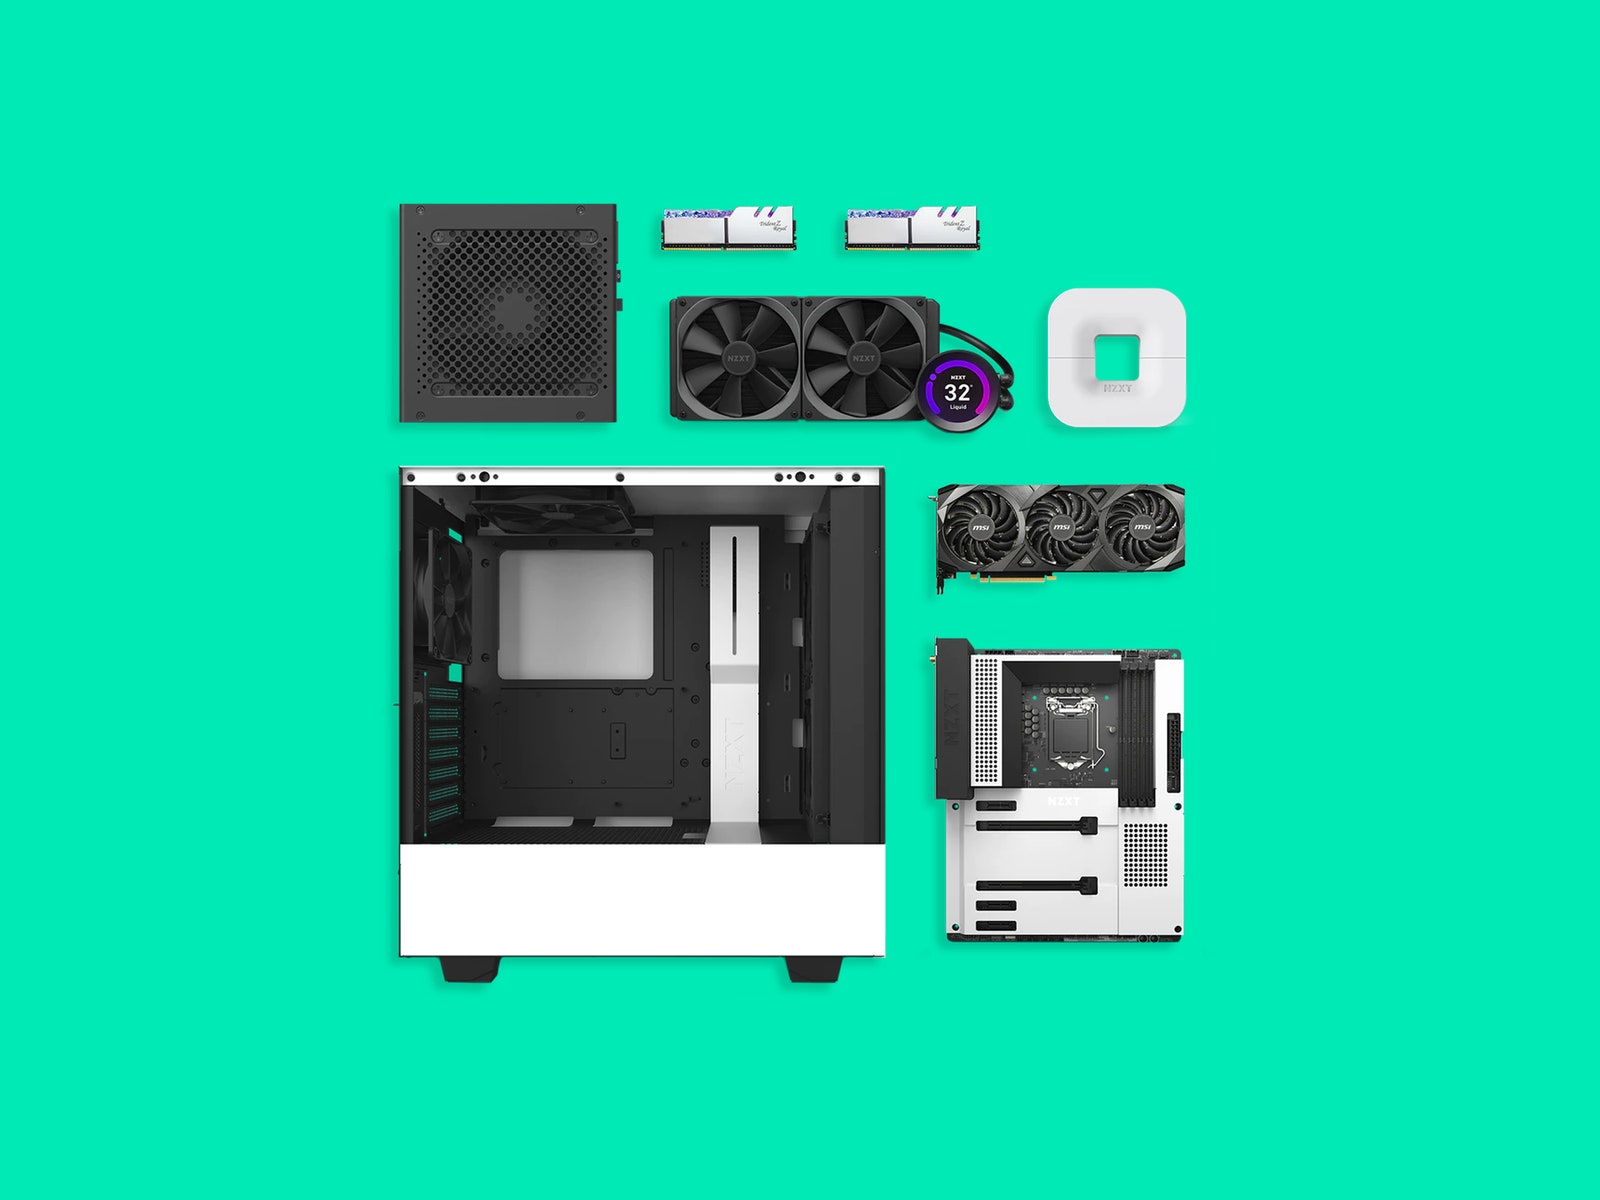 NZXT BLD PC disassembled and laid out